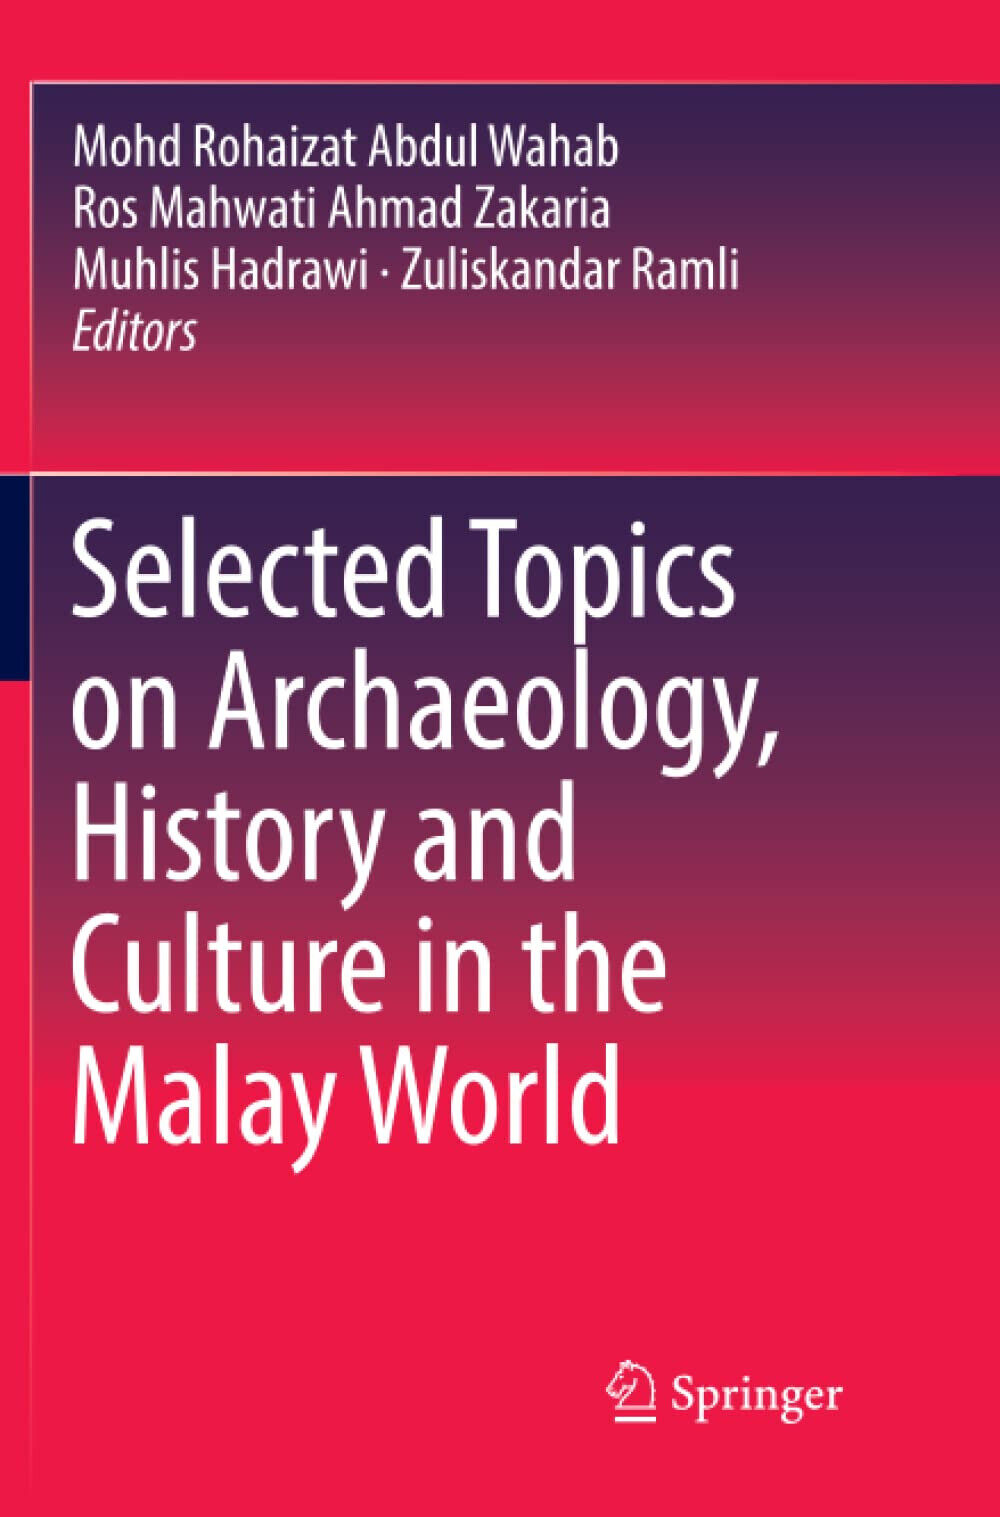 Selected Topics on Archaeology, History and Culture in the Malay World - 2019